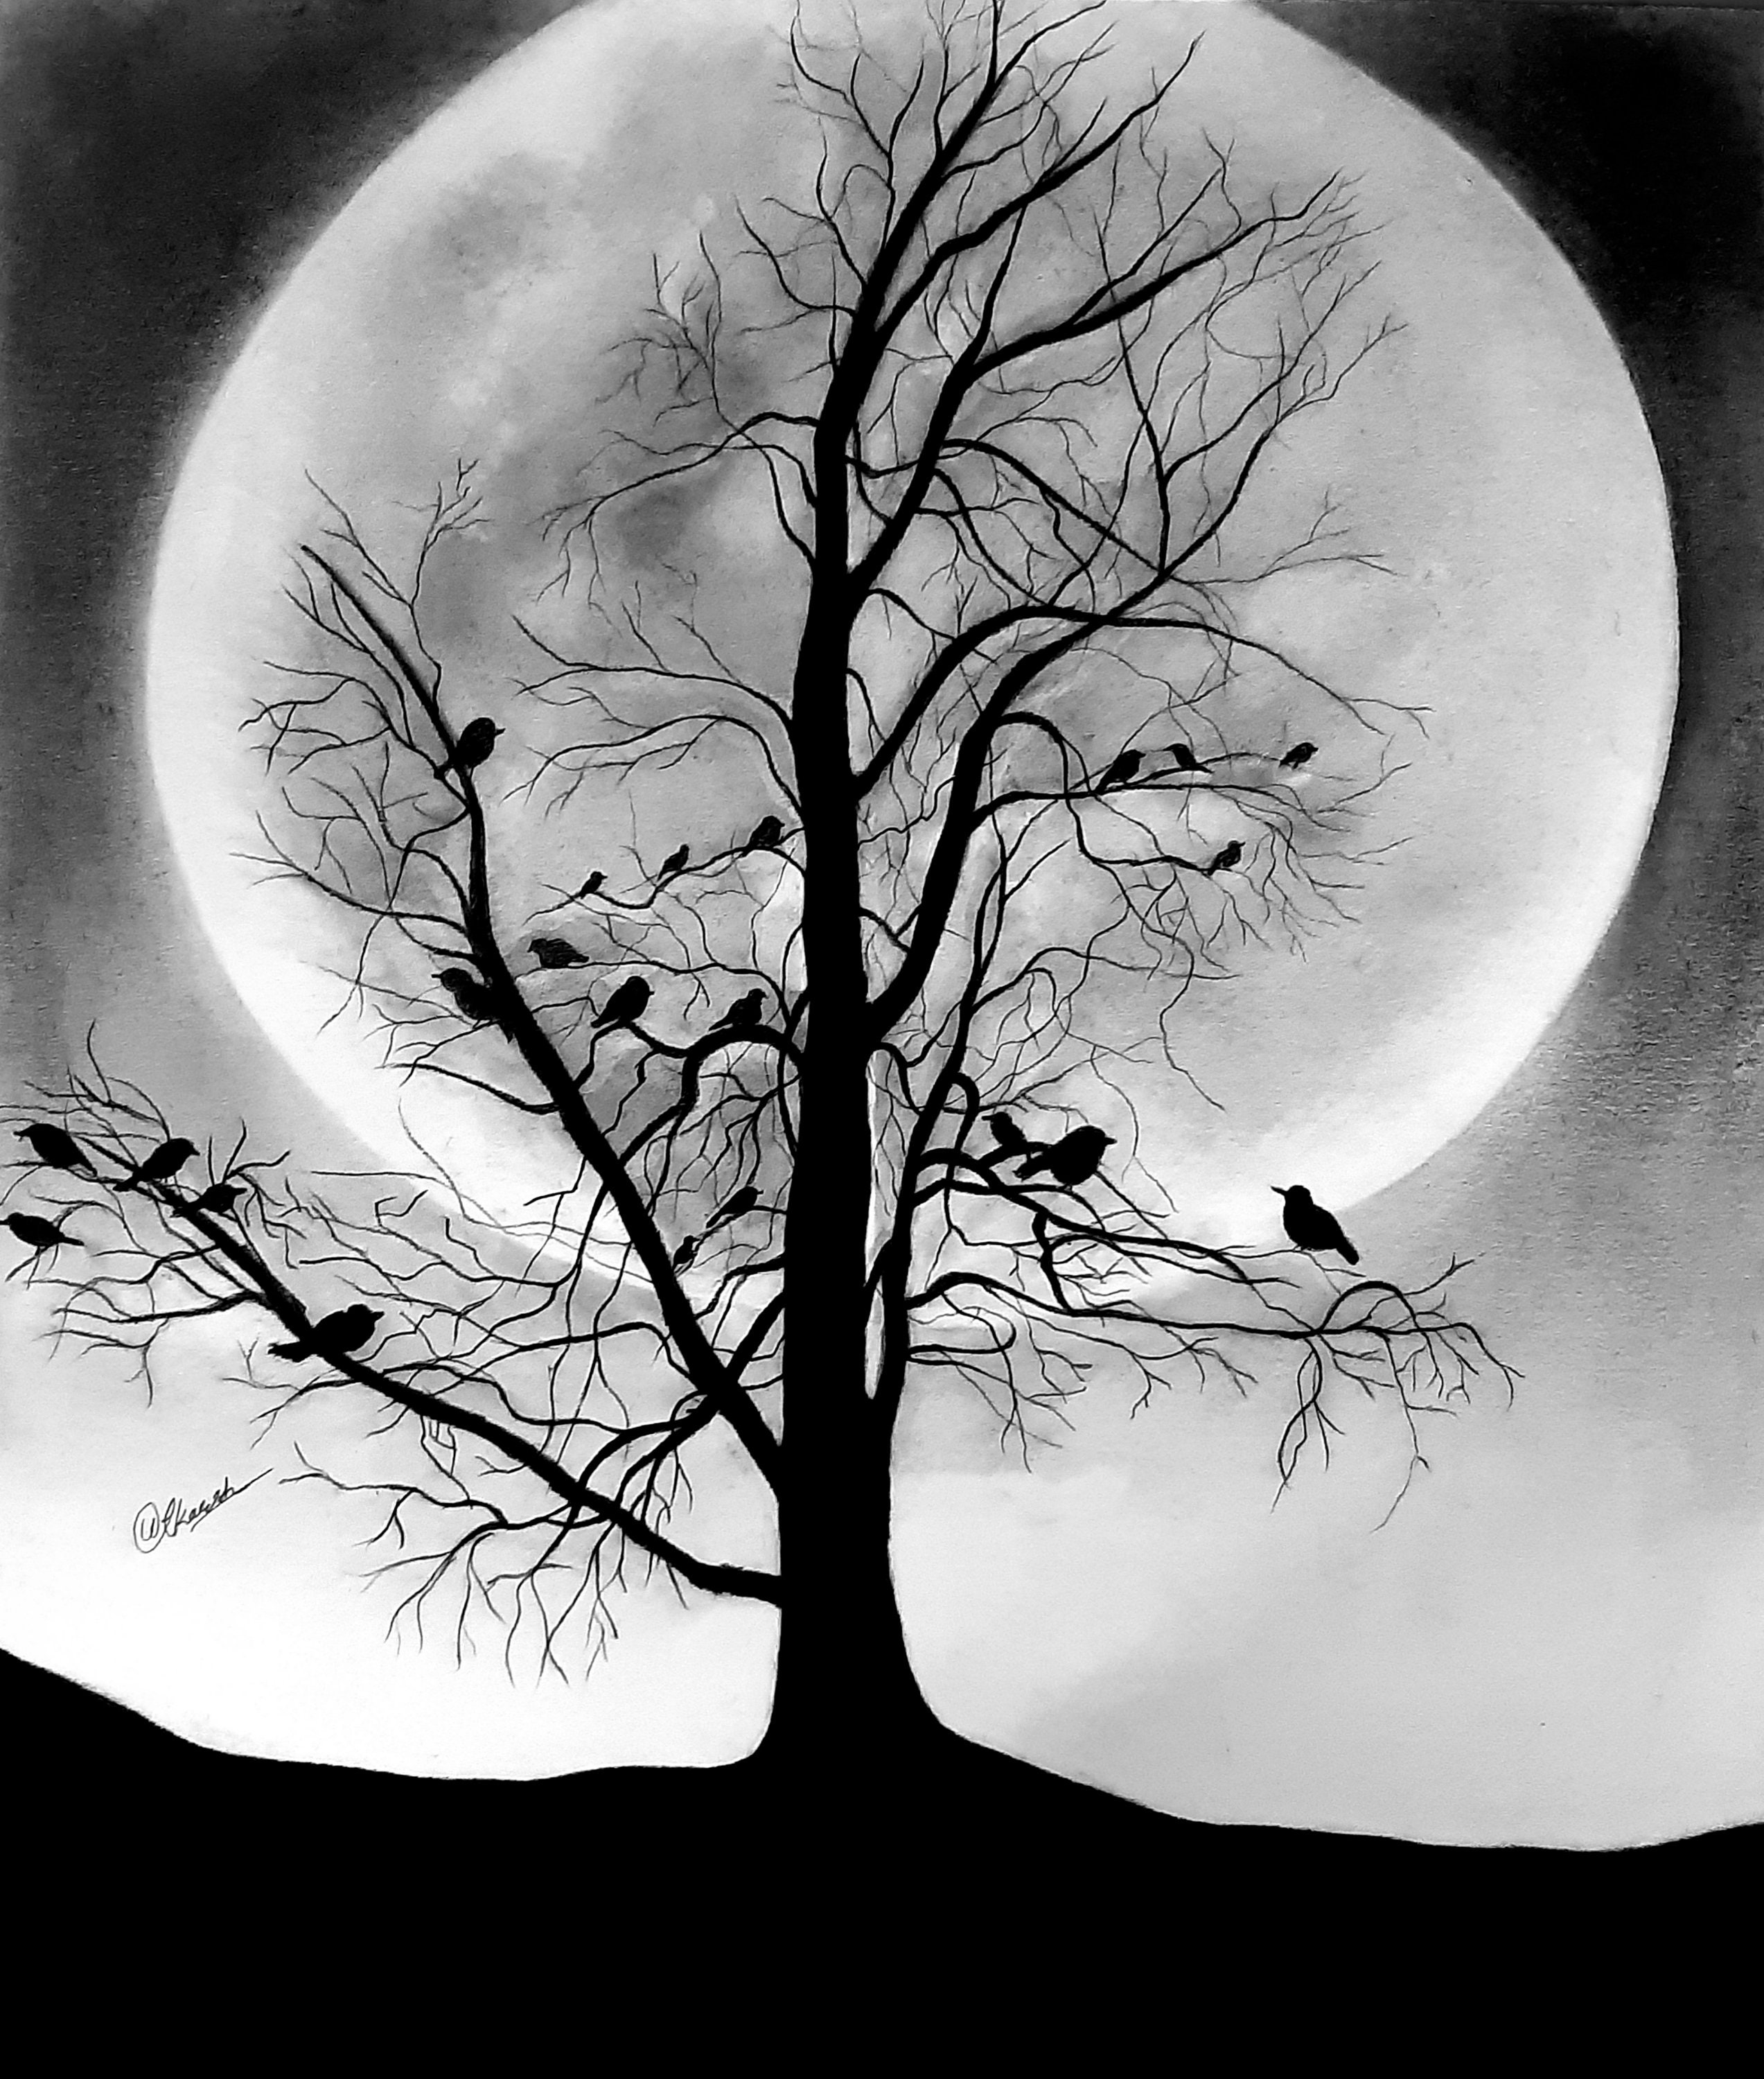 Wall decor Realistic Graphite Drawing Best Gift Idea Real Painting Tree with Moon Landscape Scenery Original pencil drawing